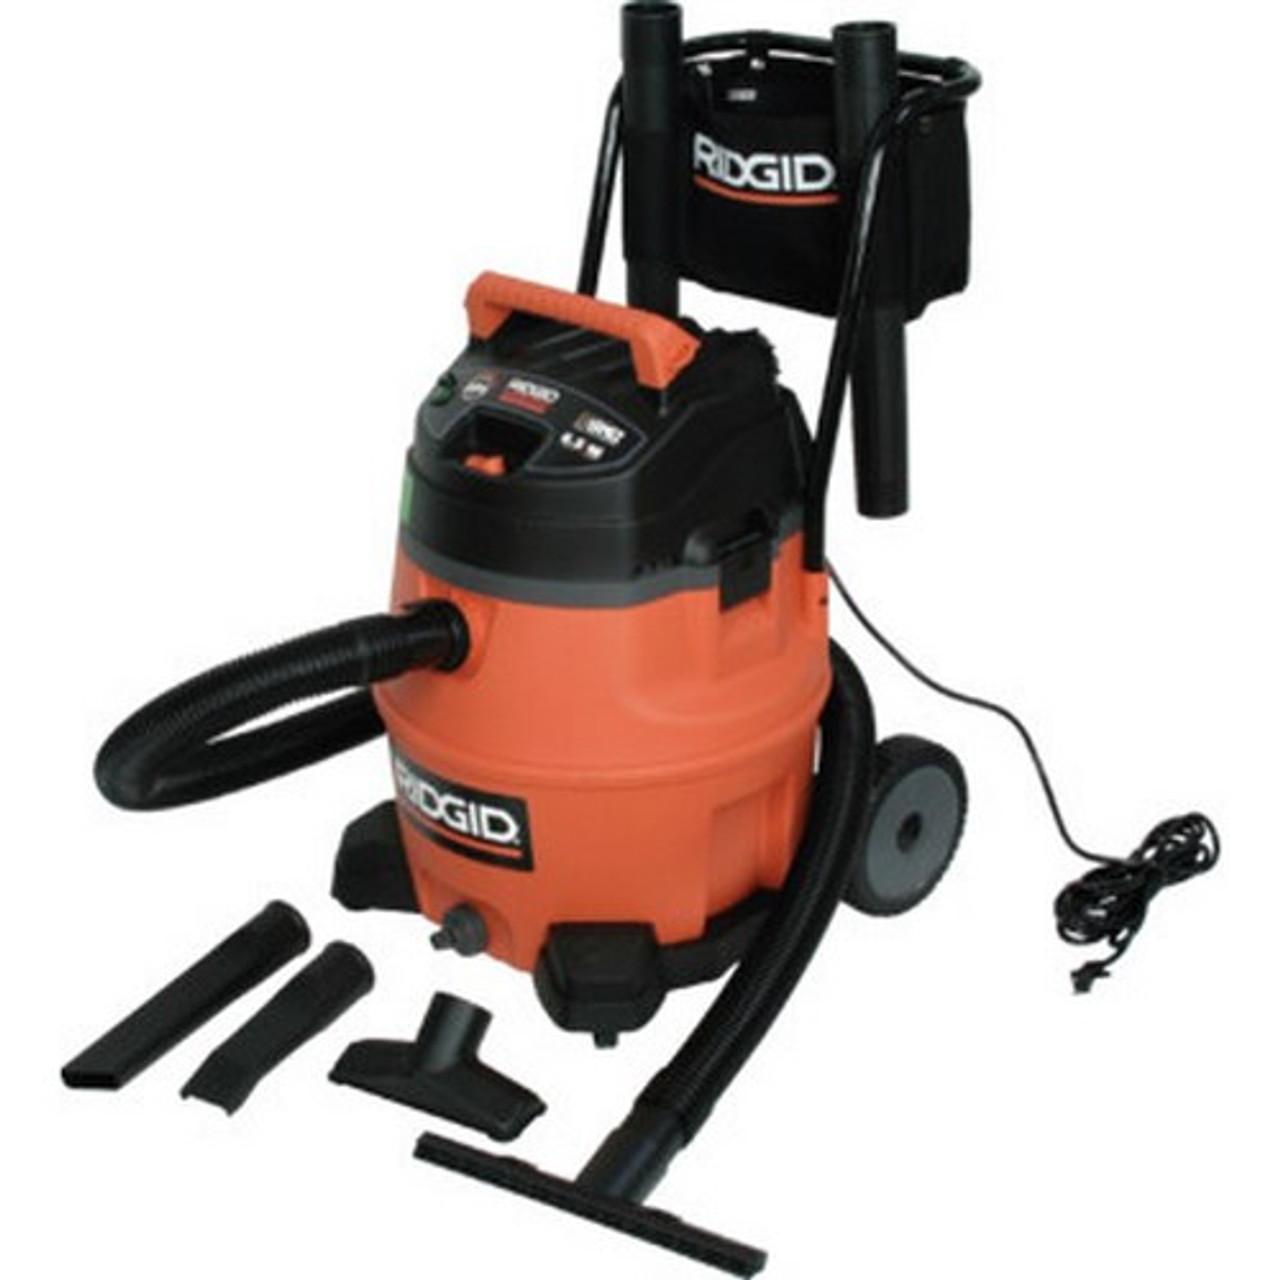 Ridgid 16 Gallon Stainless Wet/Dry Vac. New in Box - tools - by